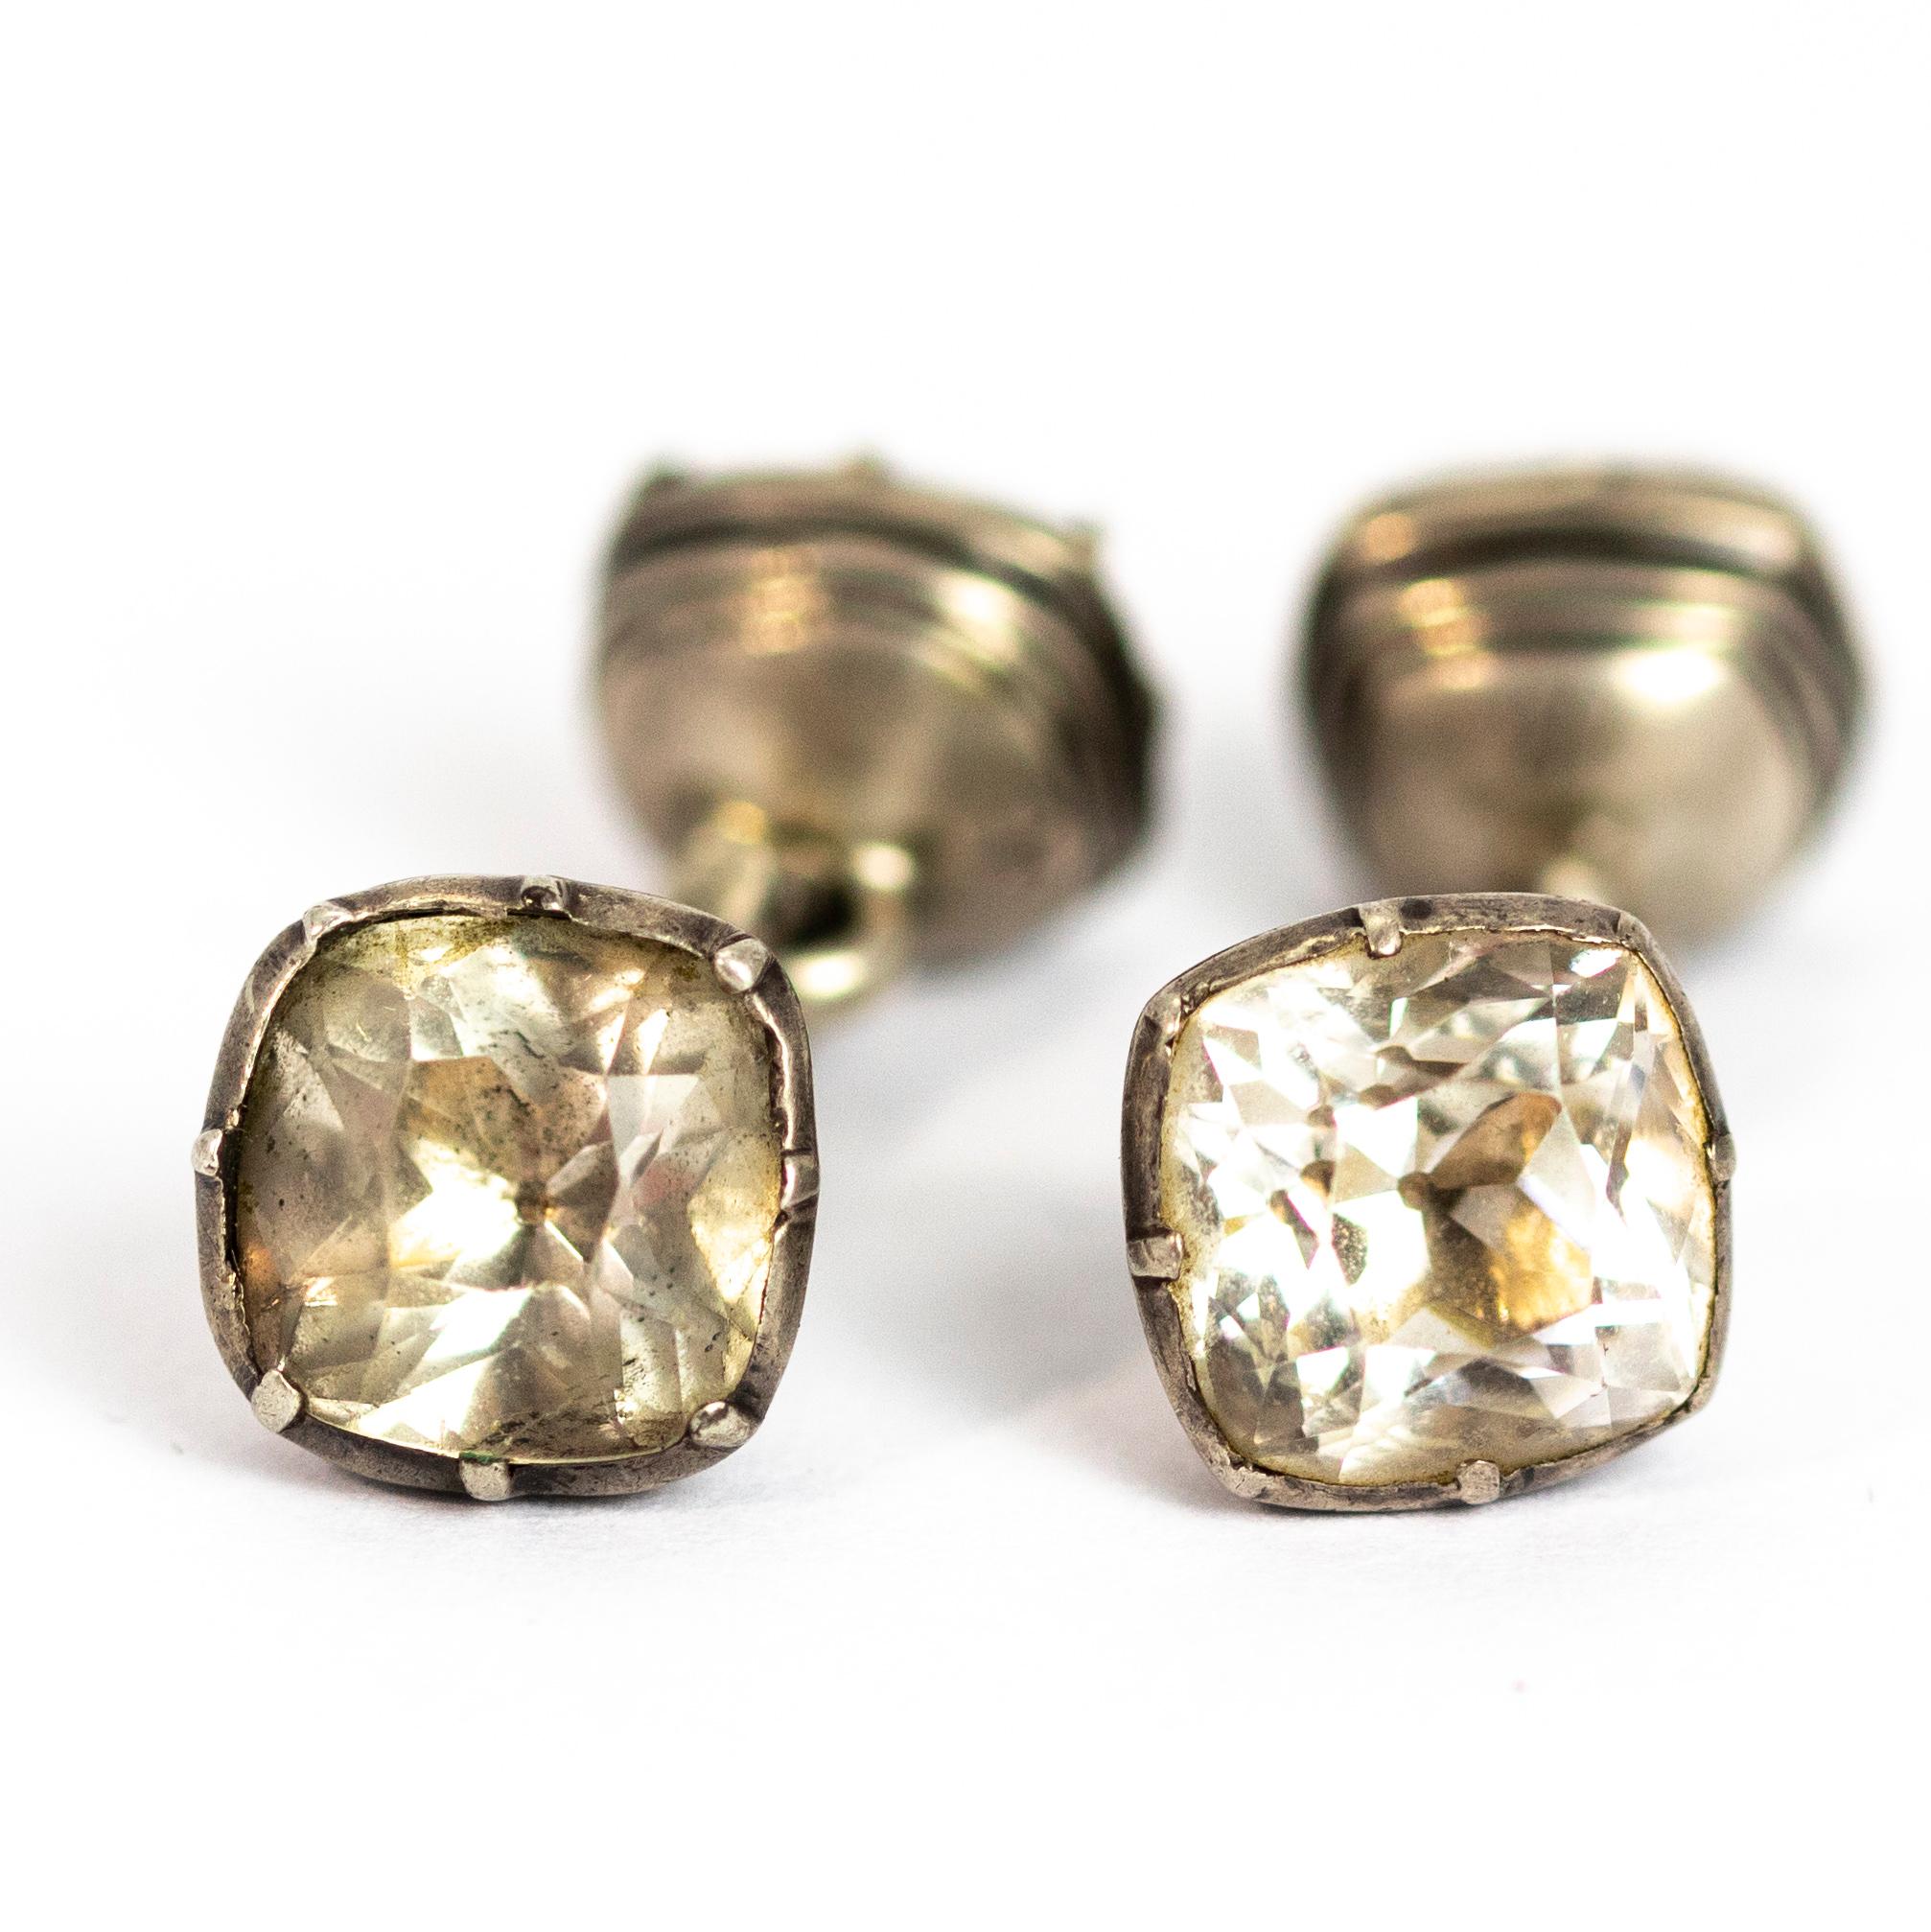 These chunky crystal cufflinks are a sure show stopper. Set in silver banded settings and these also have the initials R an A engraved on them. The very large rock crystals have a wonderful shimmer to them.

Stone Dimensions: 11mm x 11mm 